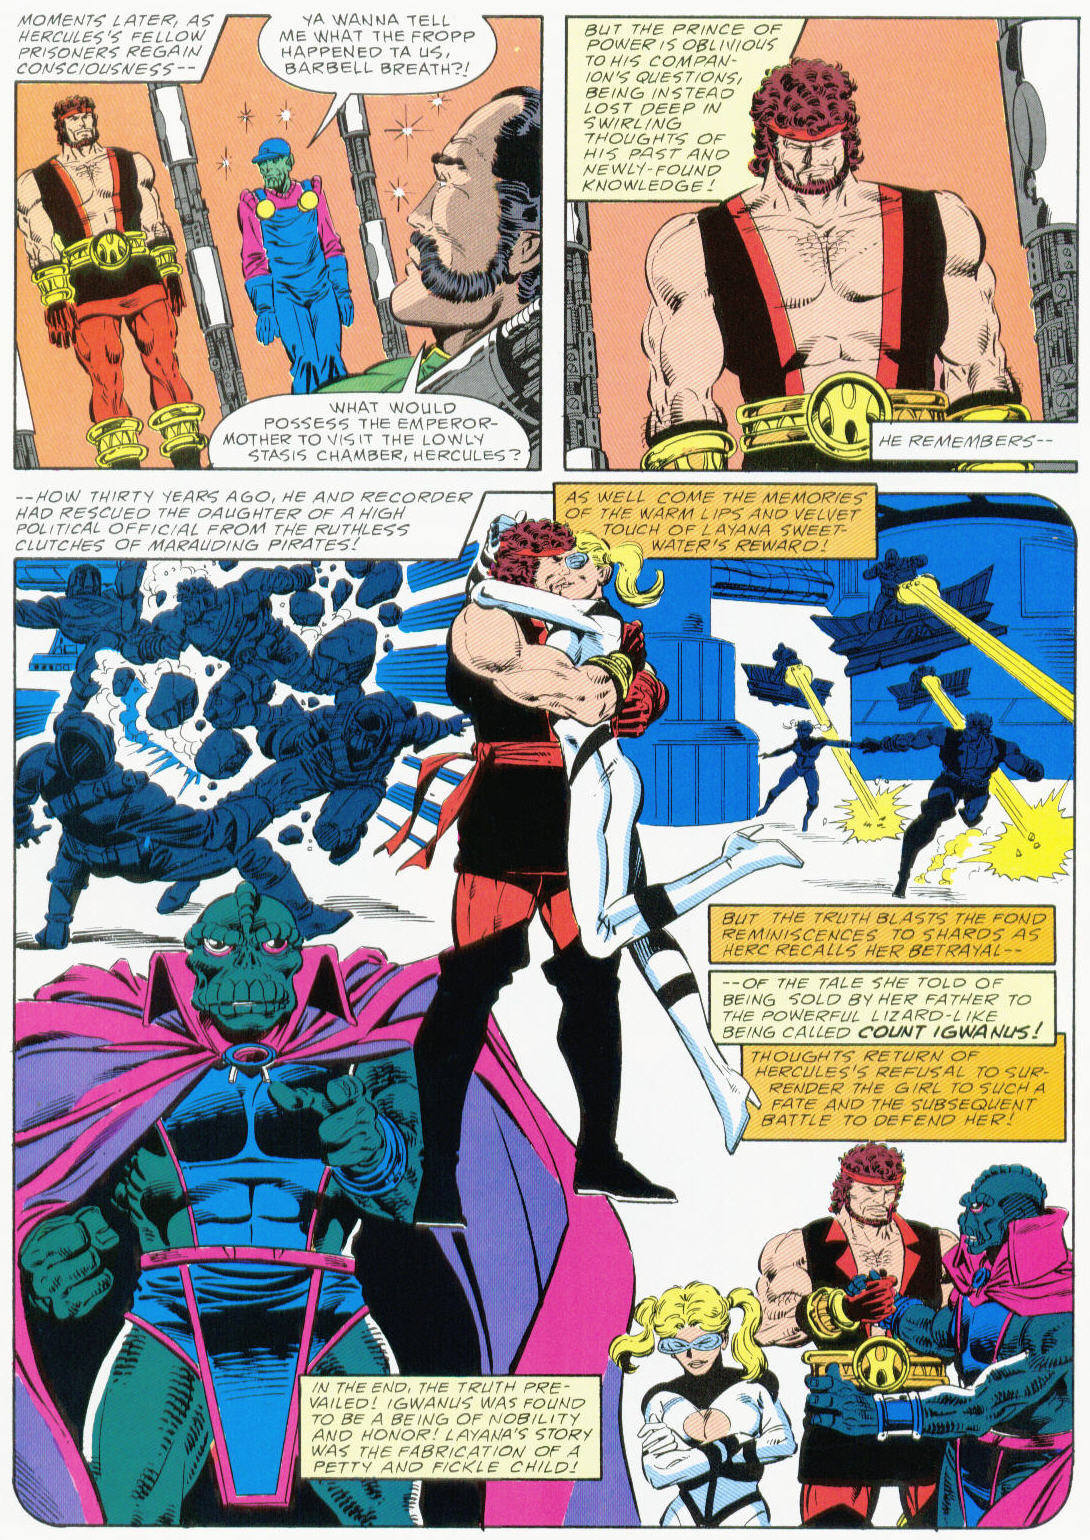 Marvel Graphic Novel issue 37 - Hercules Prince of Power - Full Circle - Page 42